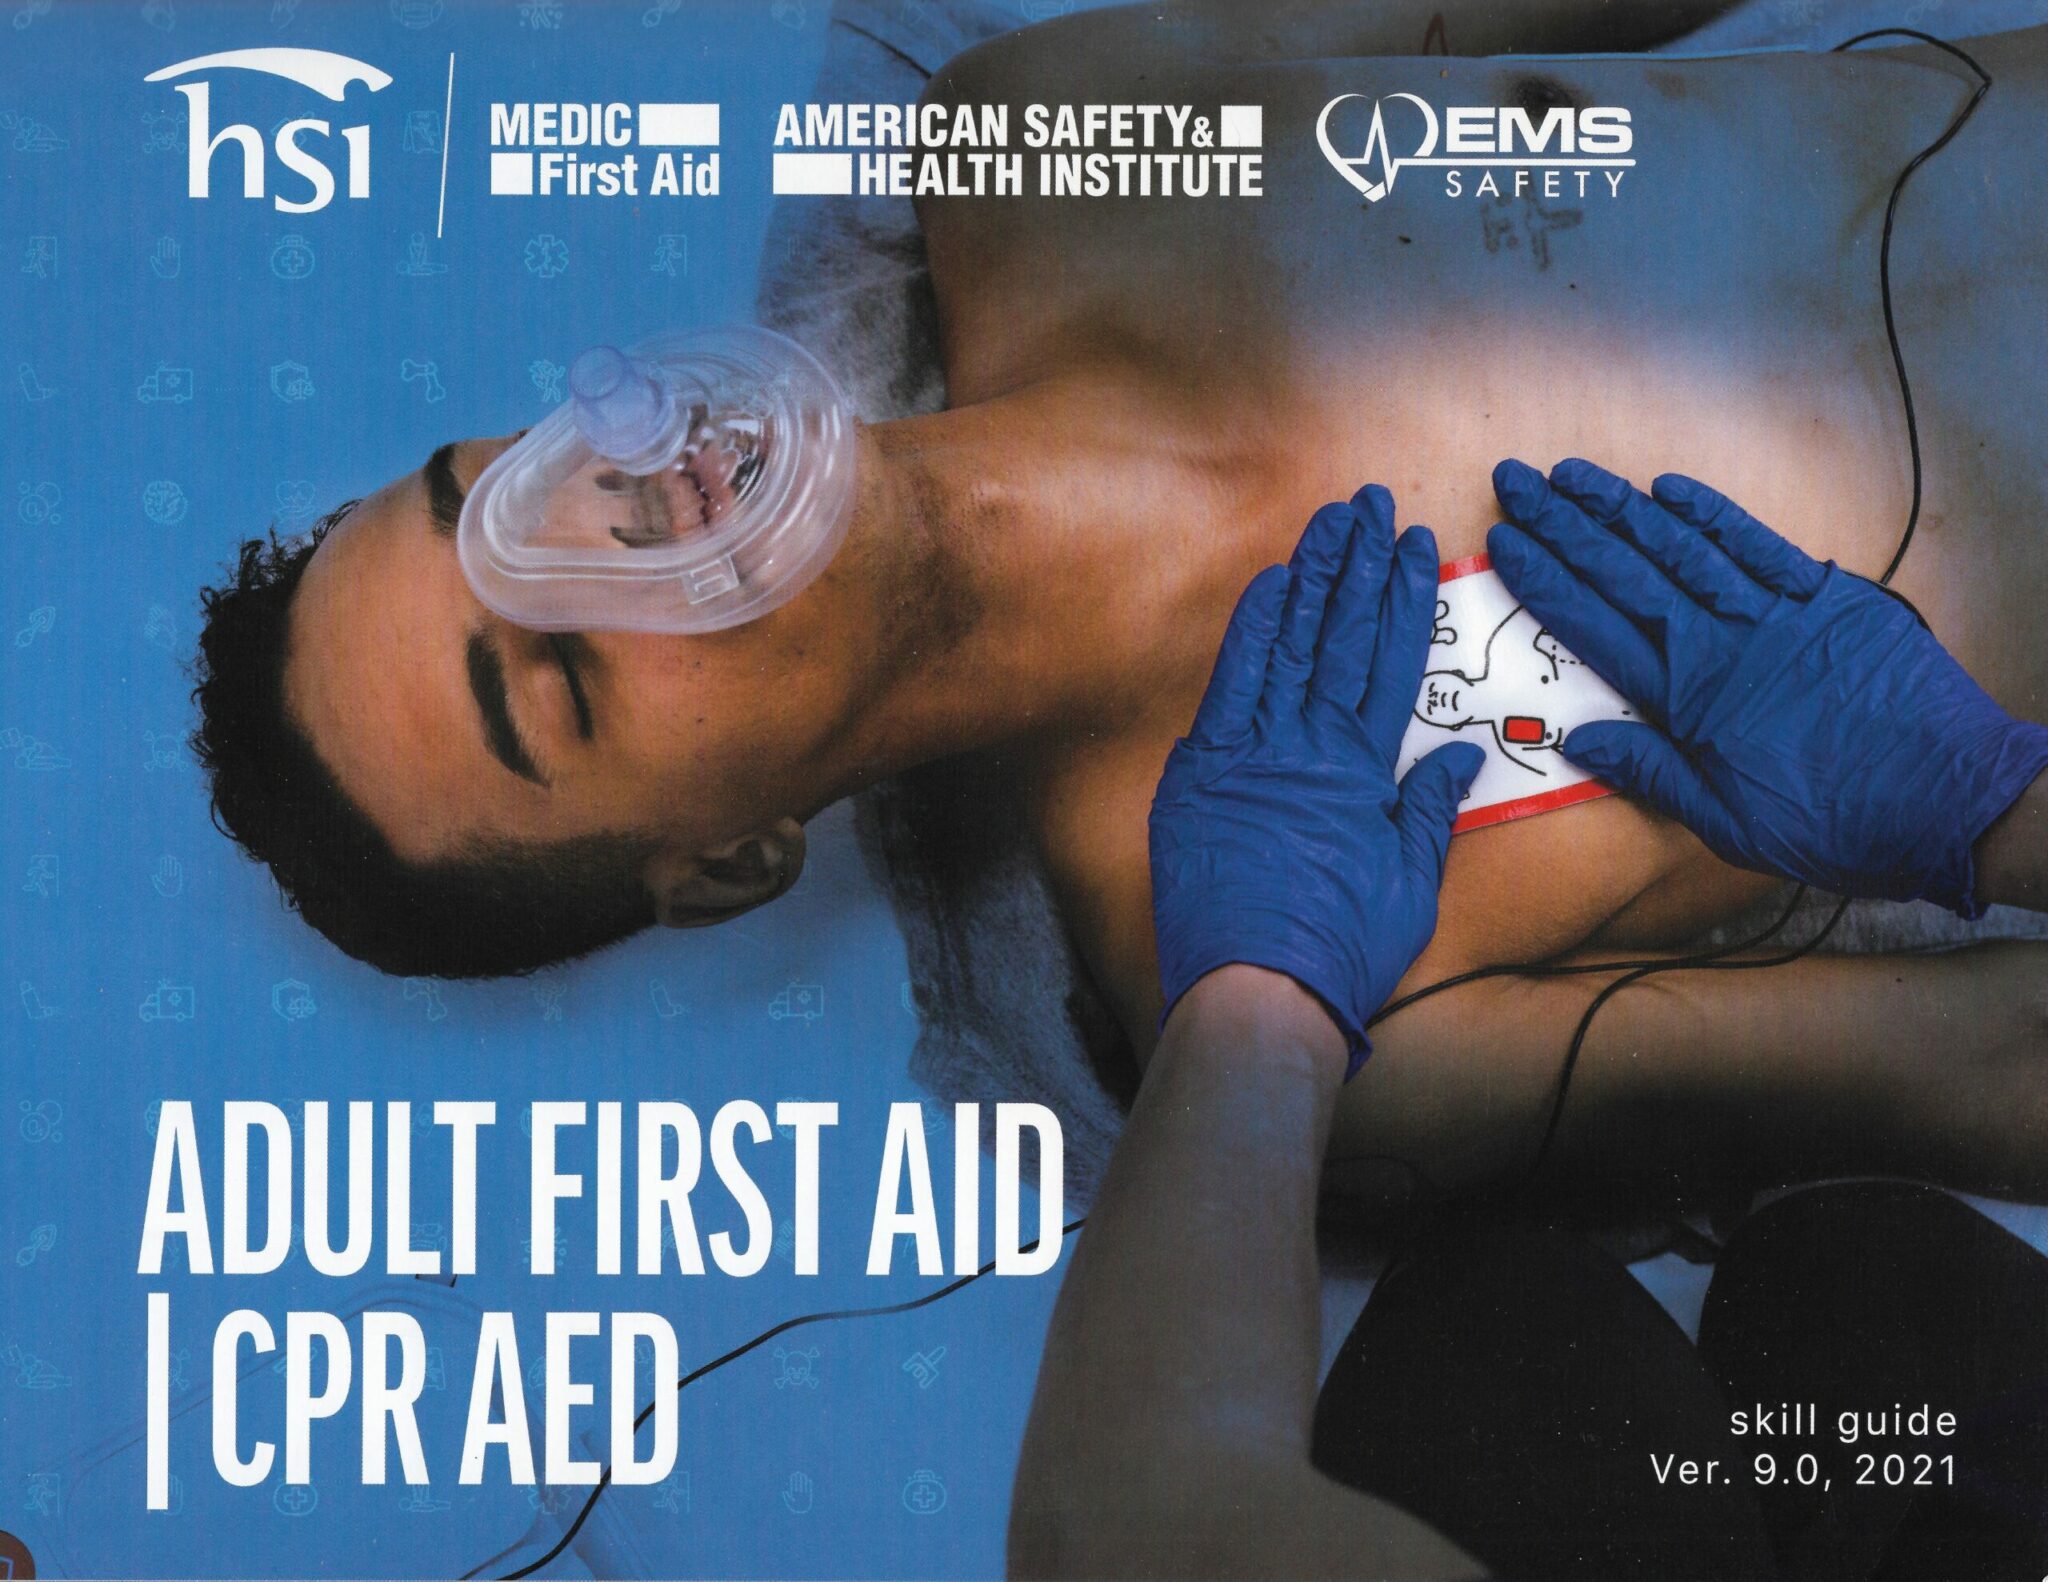 HSI CPR and First Aid